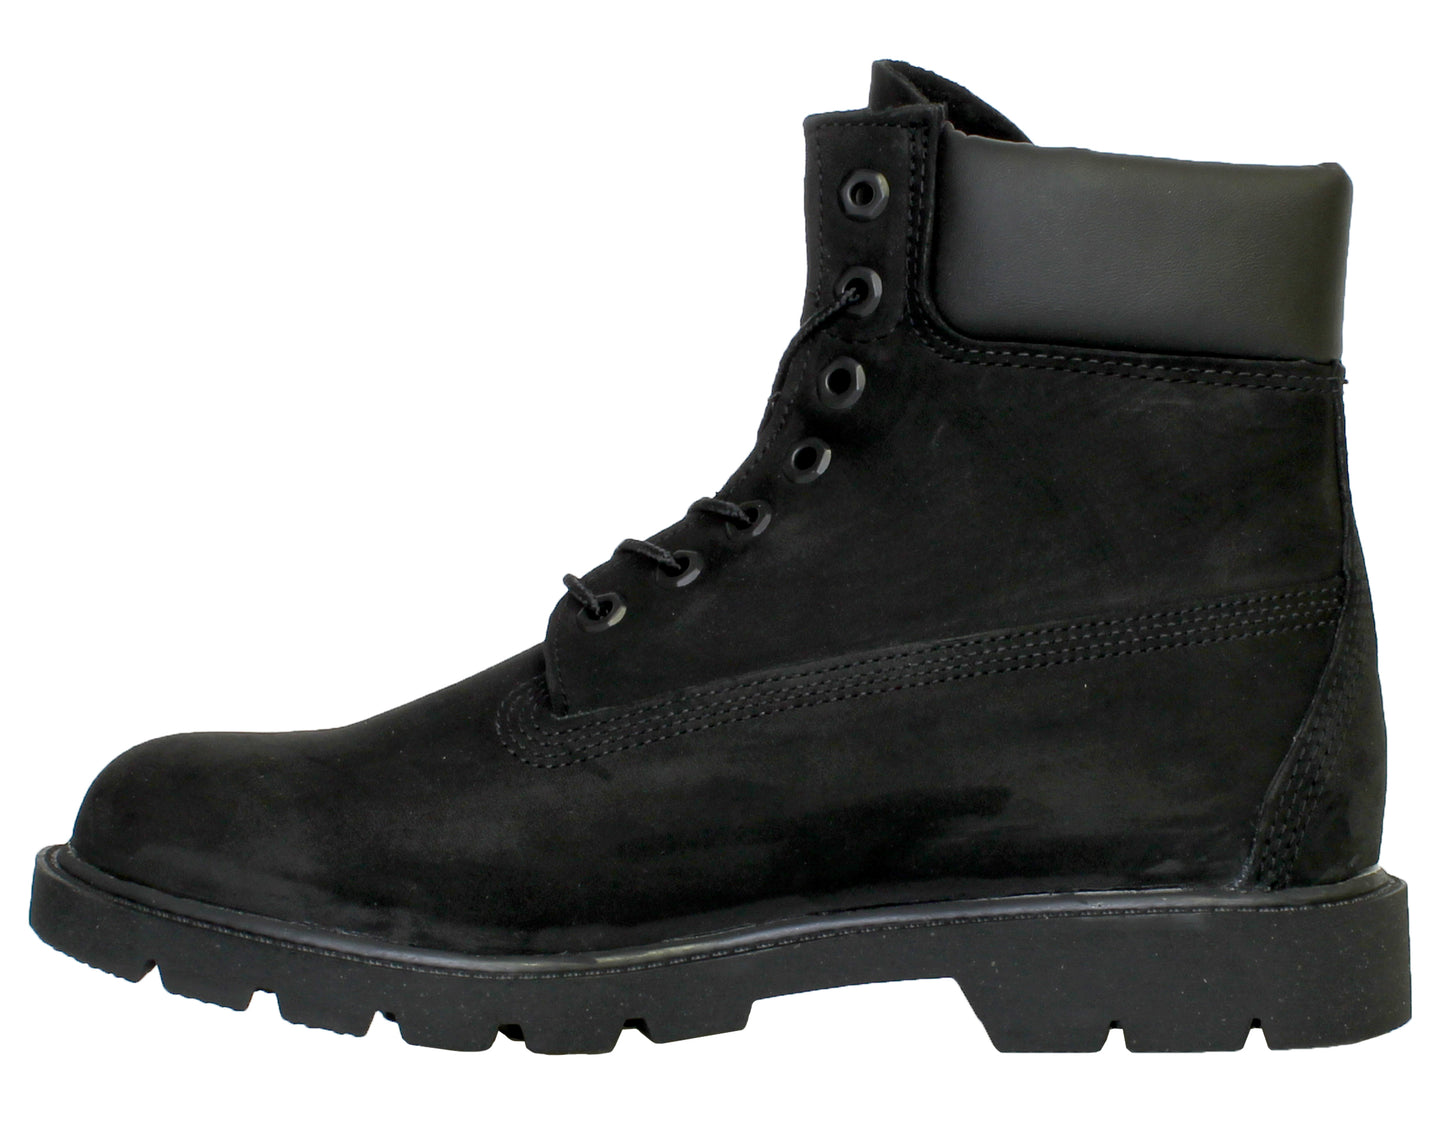 Timberland 6-Inch Basic W/Padded Collar Waterproof Men's Boots